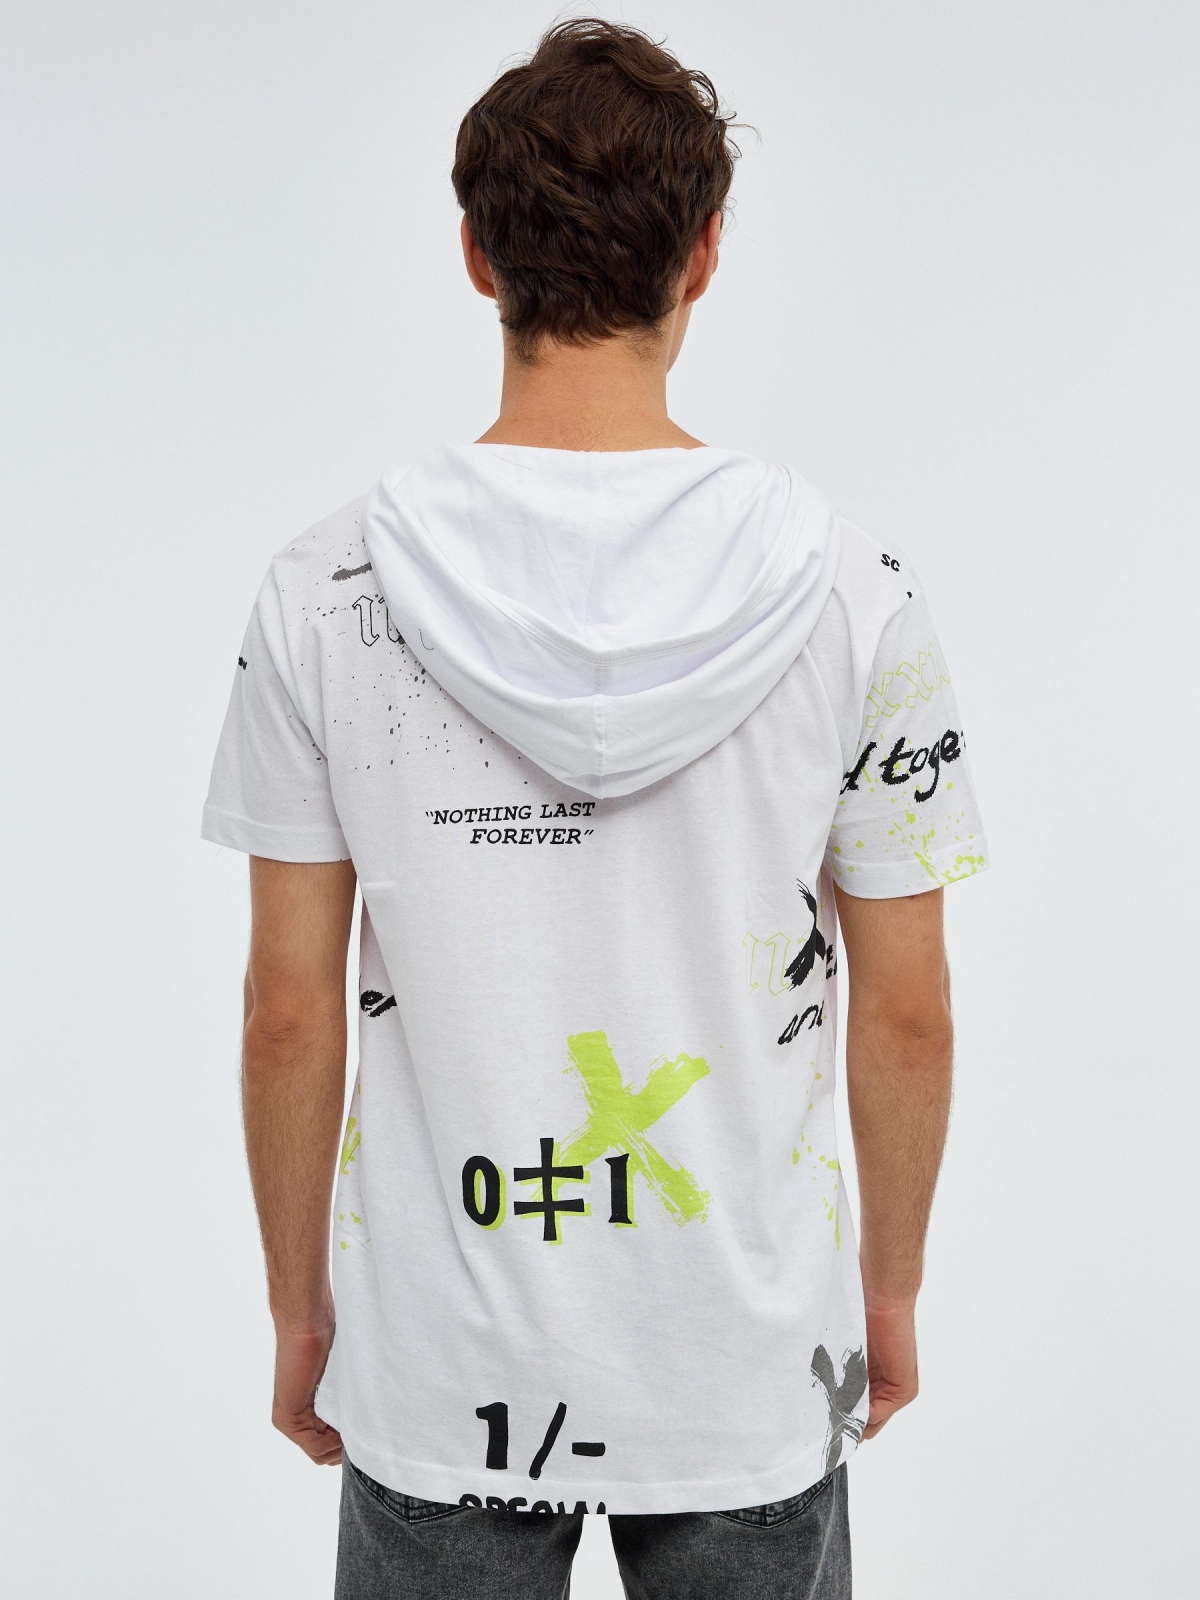 Hooded string t-shirt white middle back view